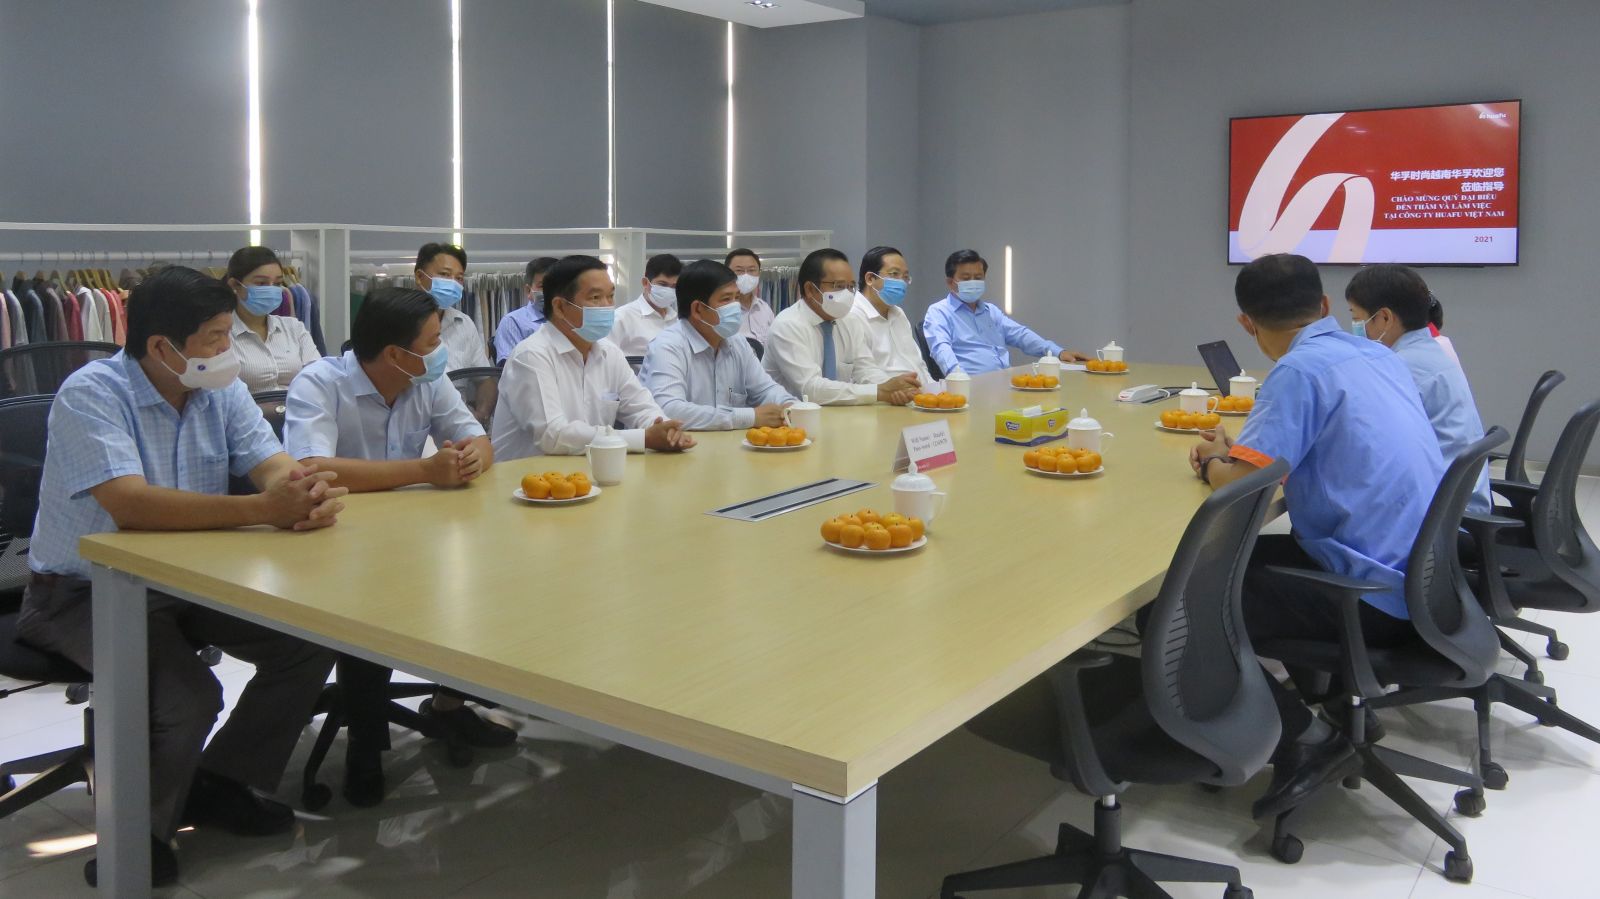 The delegation works, visits about production at Huafu Vietnam One Member Limited Company